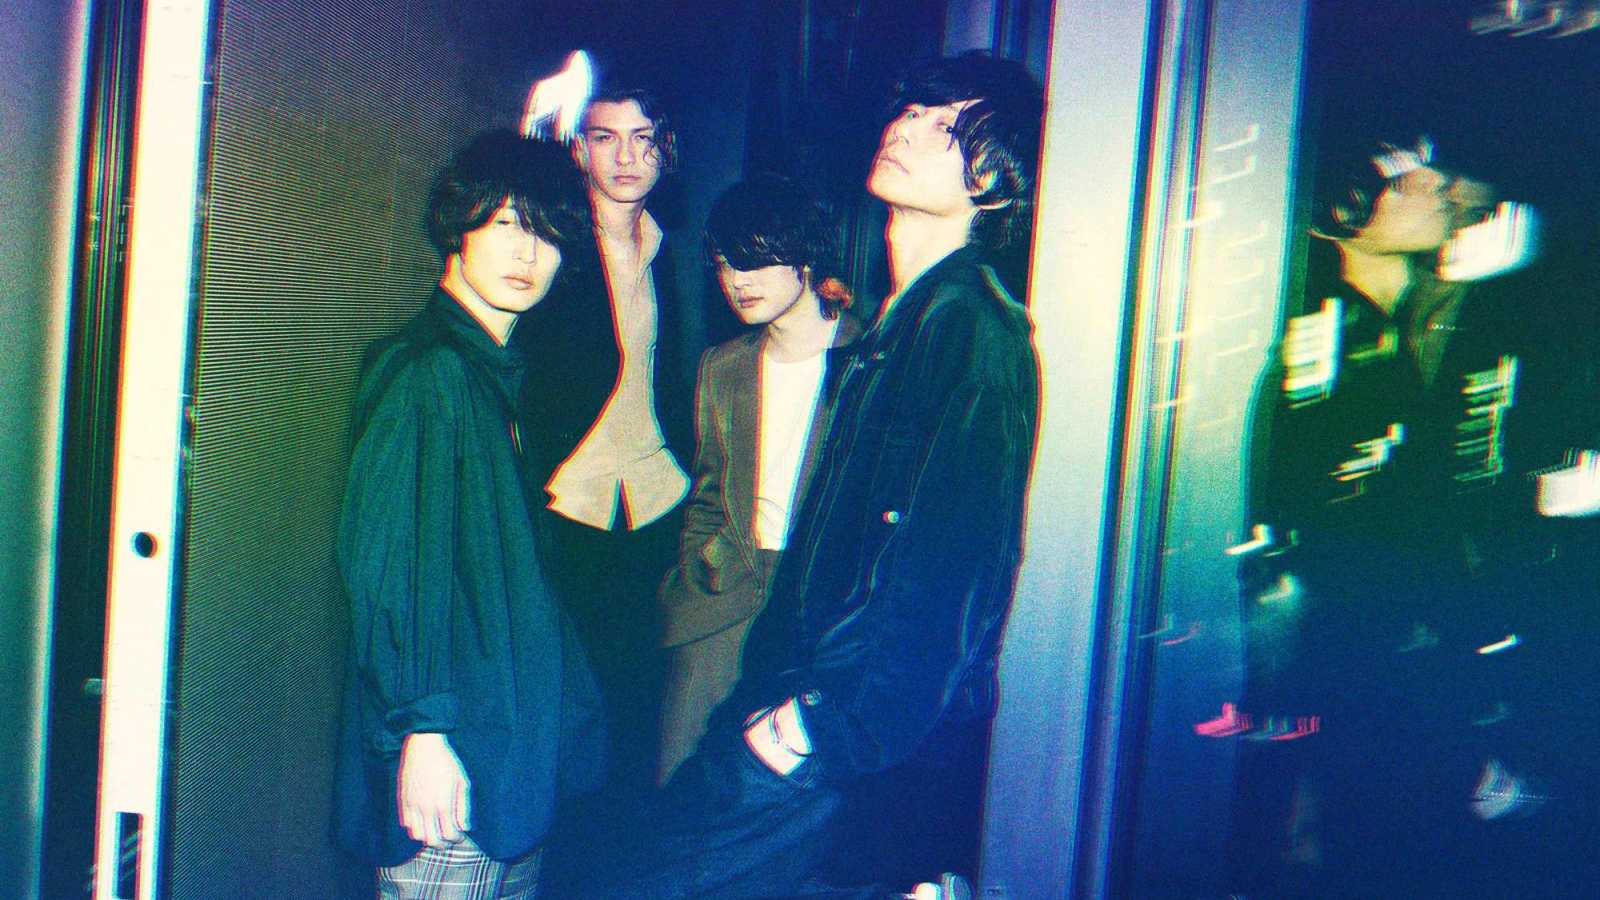 [Alexandros] © [Alexandros]. All rights reserved.